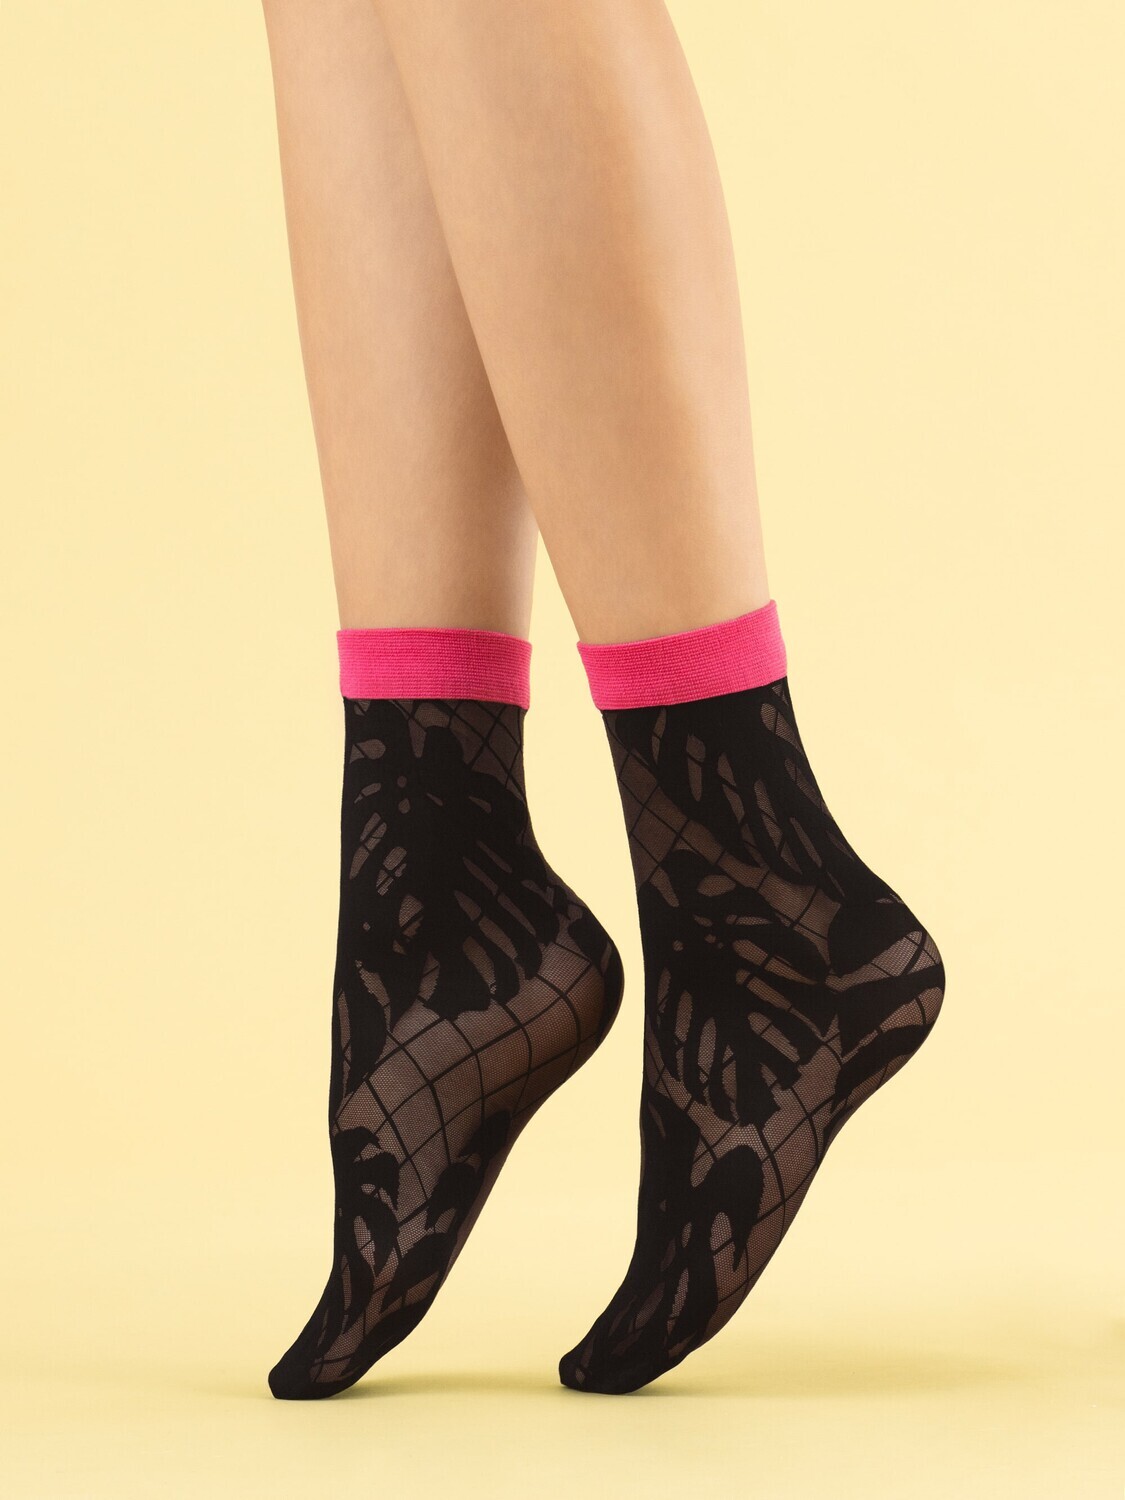 Fiore: Luscious Pink Cuffed Patterned Socks SOLD OUT